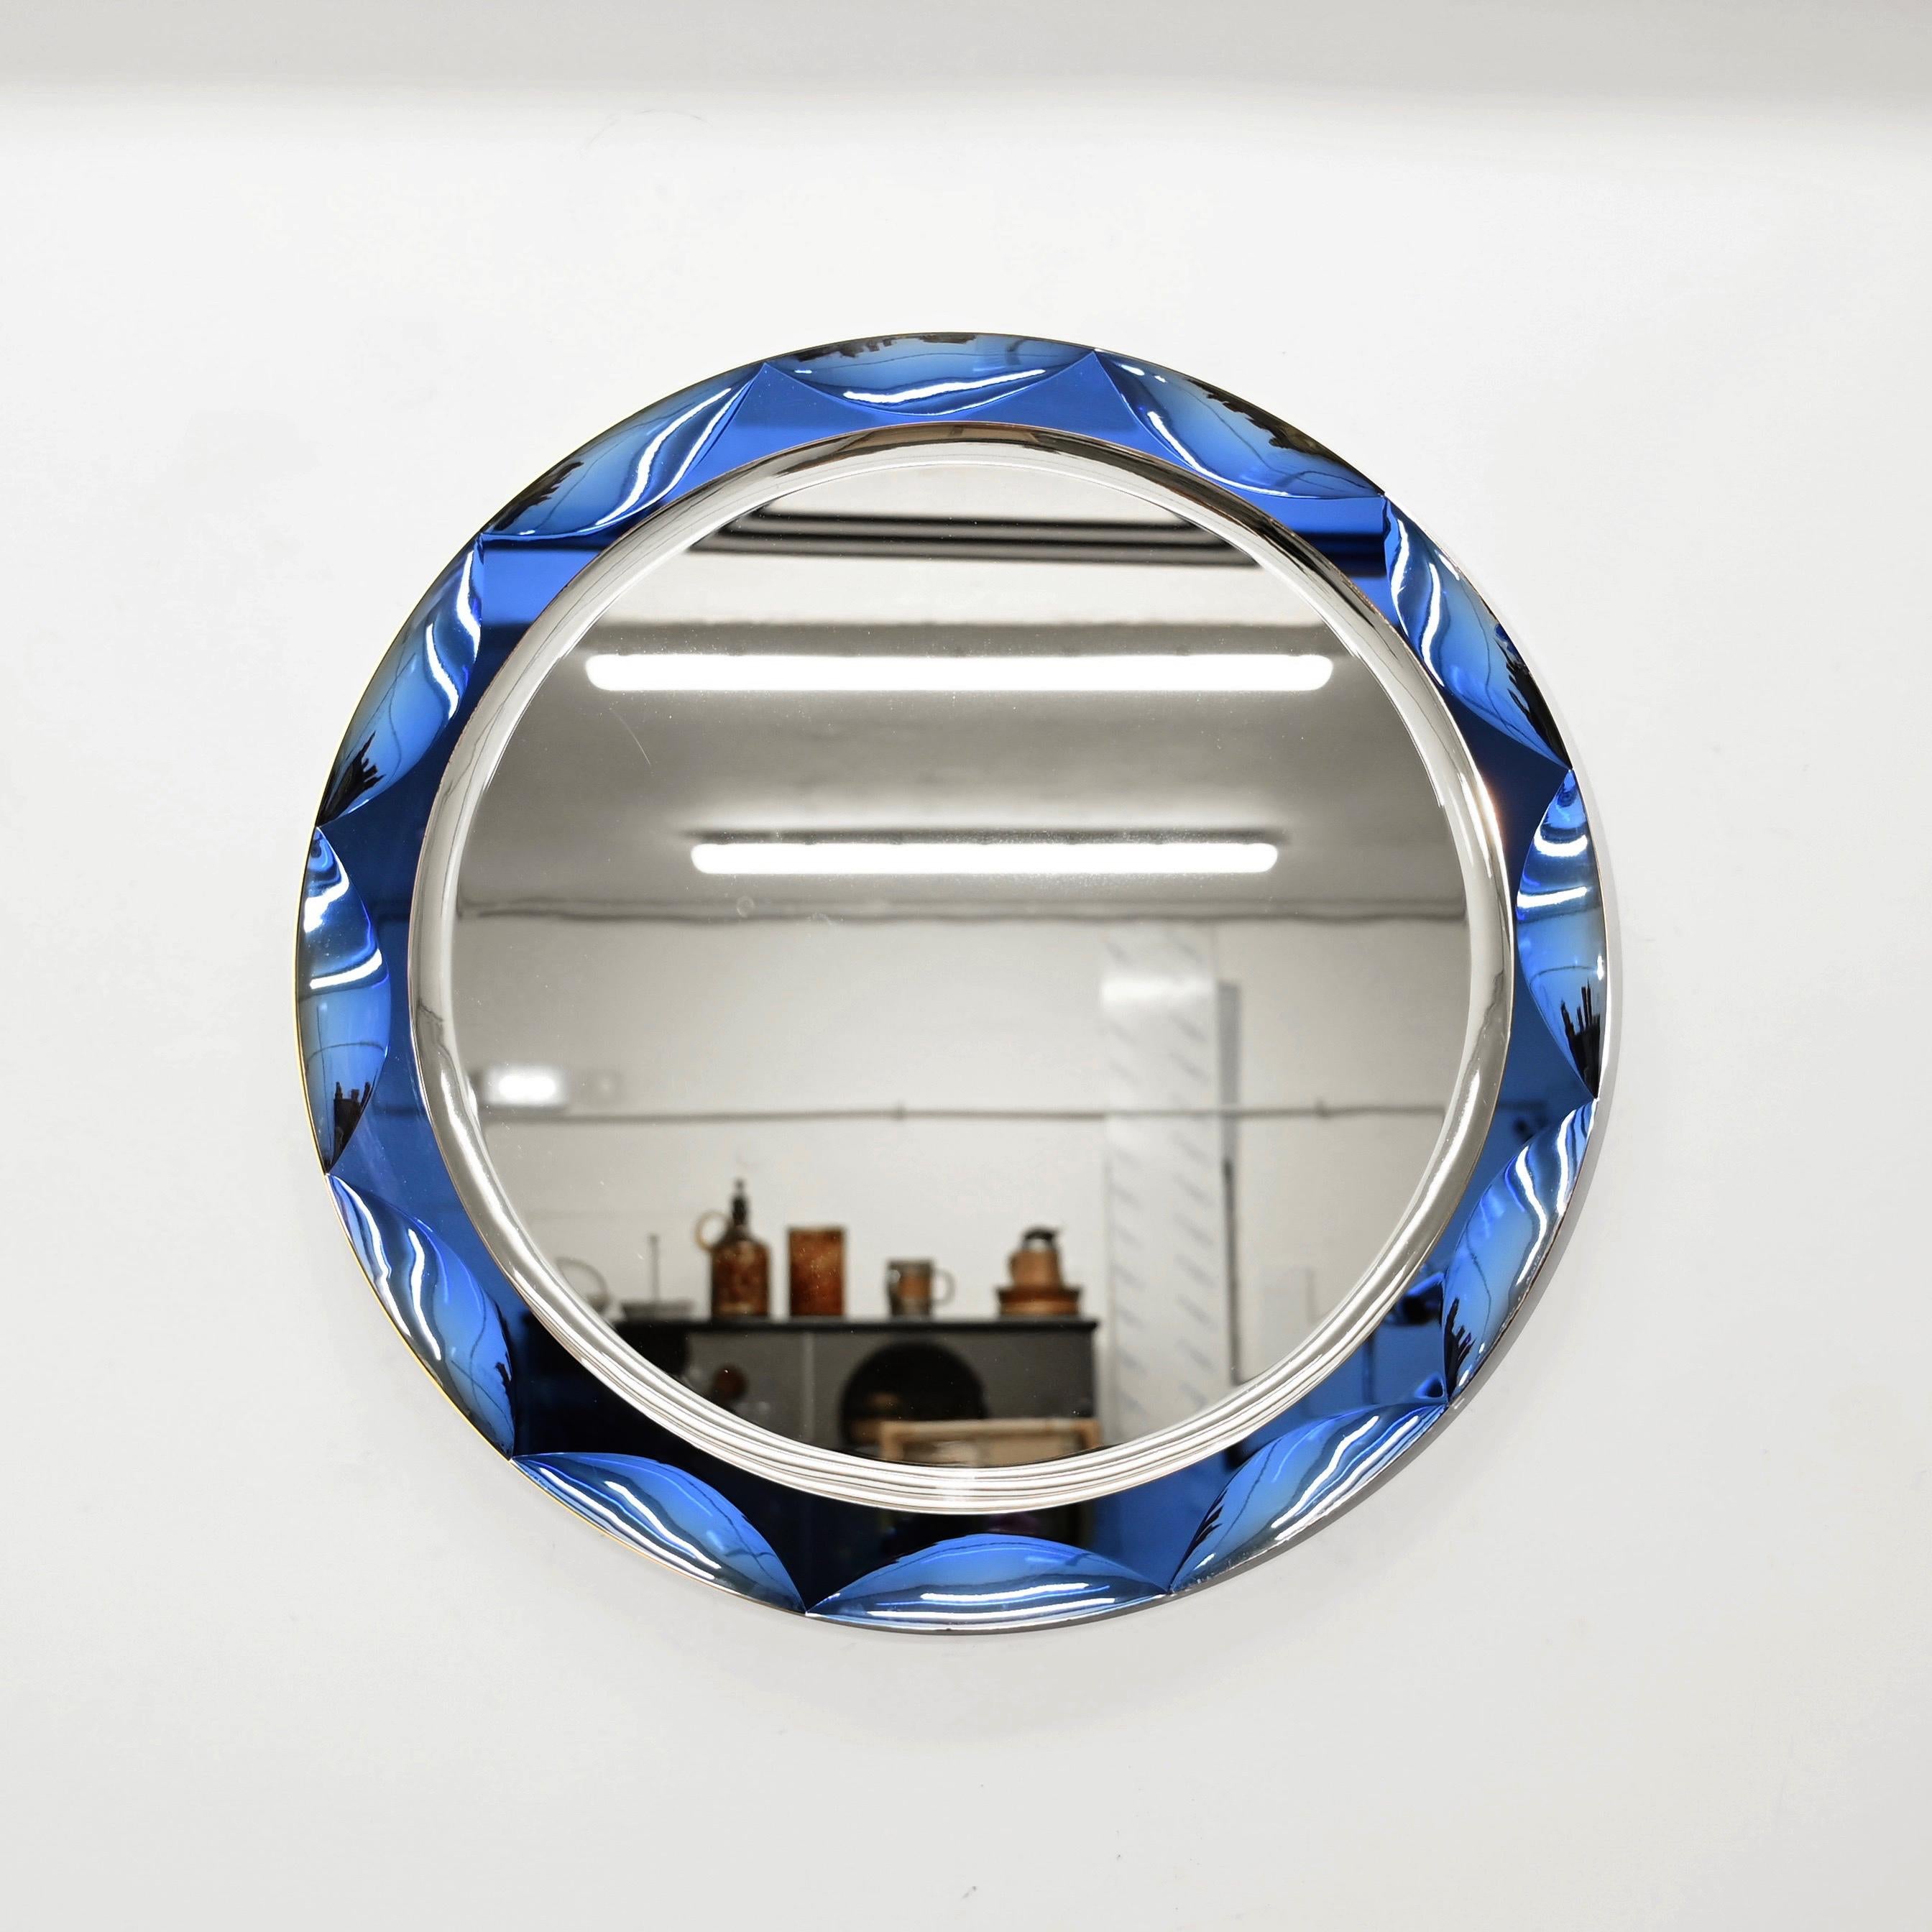 Magnificent round double beveled mirror with a vibrant blue artglass mirror frame. This mind-blowing mirror was made by Galvorame in Italy during the 1970s and is signed on the back.

The mirror features a mind-blowing 